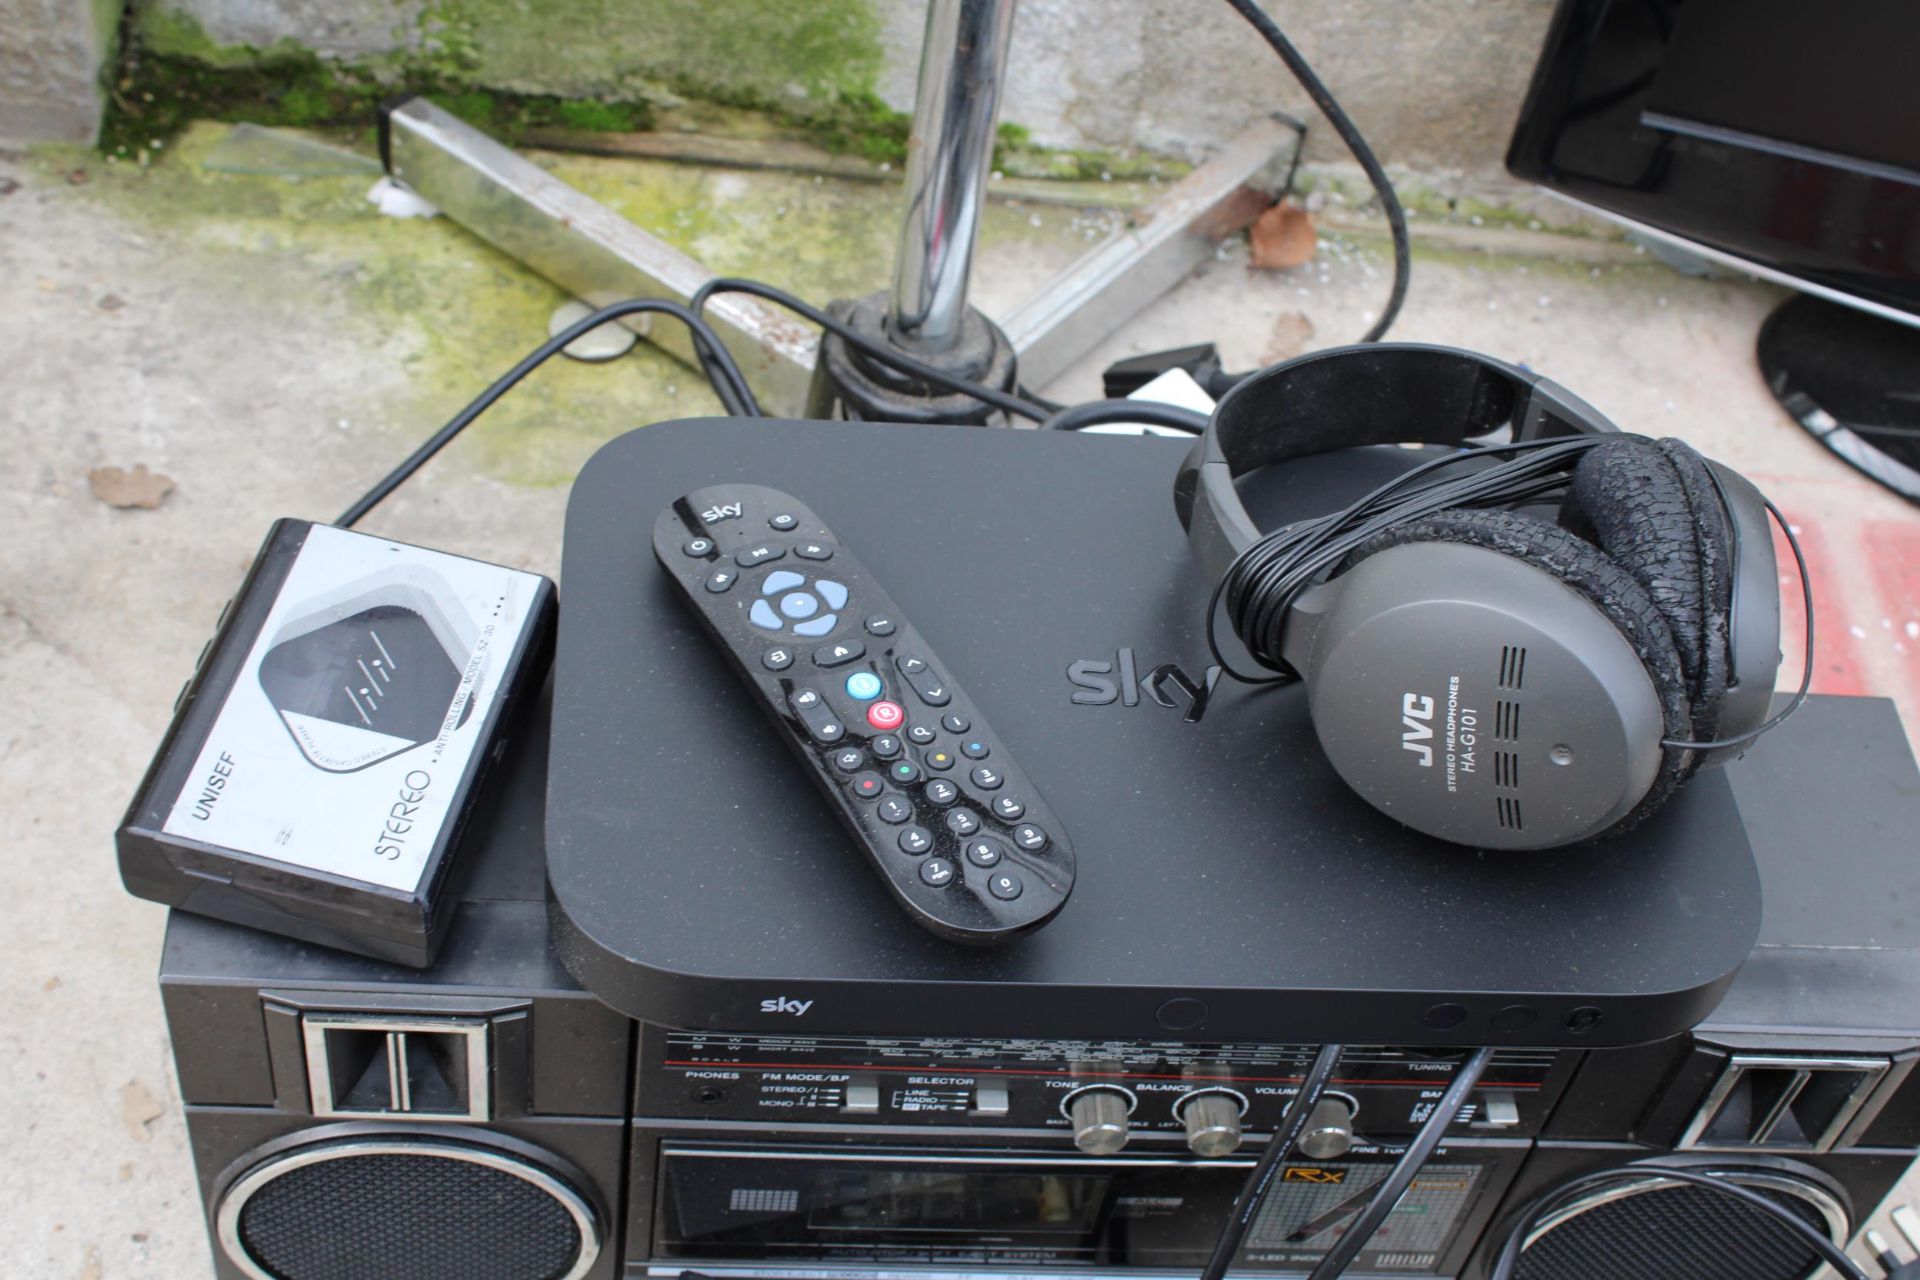 VARIOUS ELECTRICAL ITEMS TO INCLUDE FAN, CD PLAYER, SKY BOX ETC - Image 3 of 3